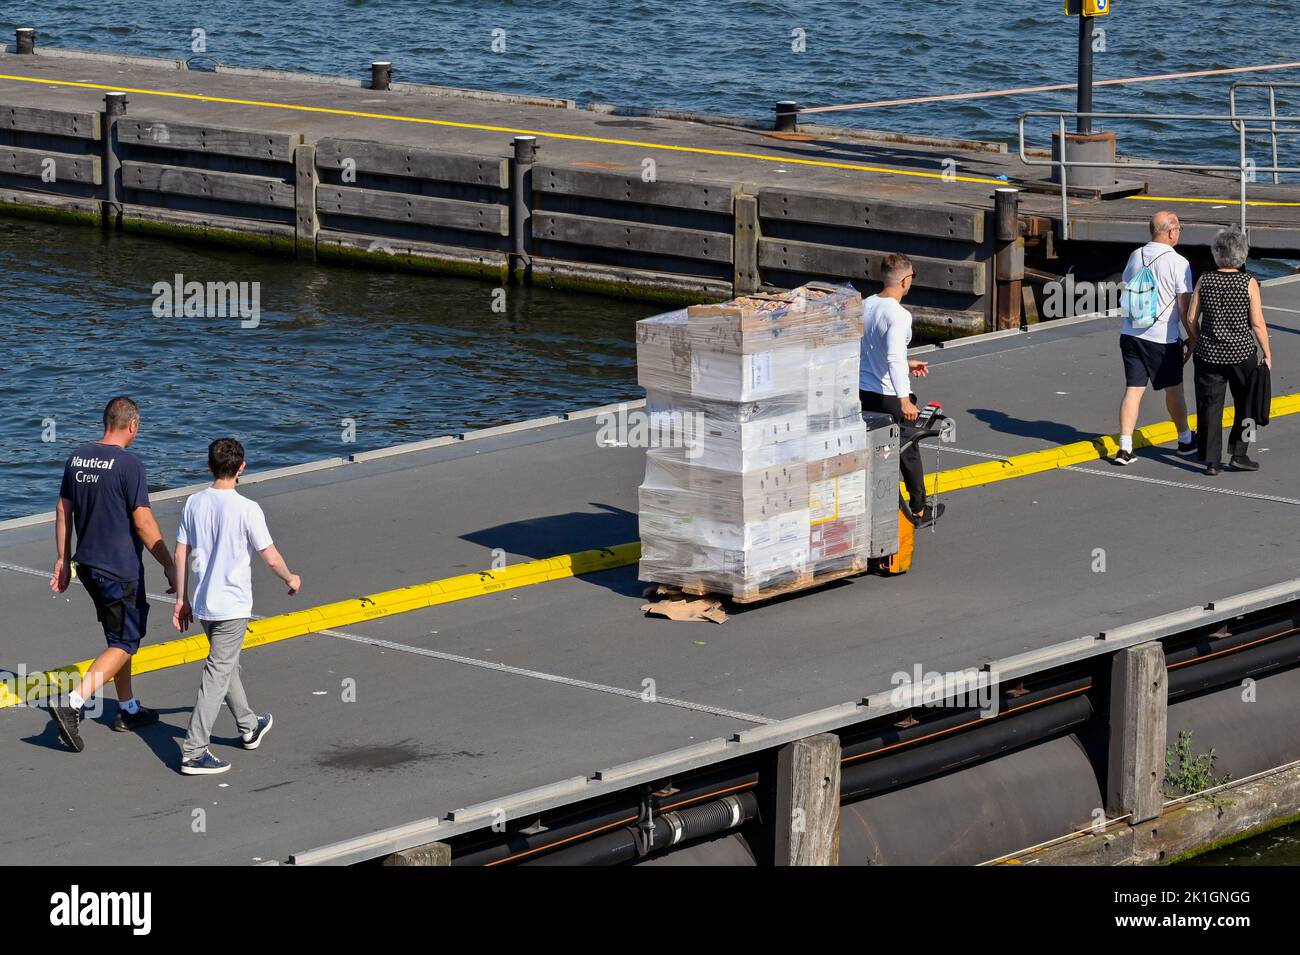 Amsterdam, Netherlands - August 2022: Crew member pulling a pallet full of supplies along a jetty for a river cruise ship moored in Amsterdam Stock Photo